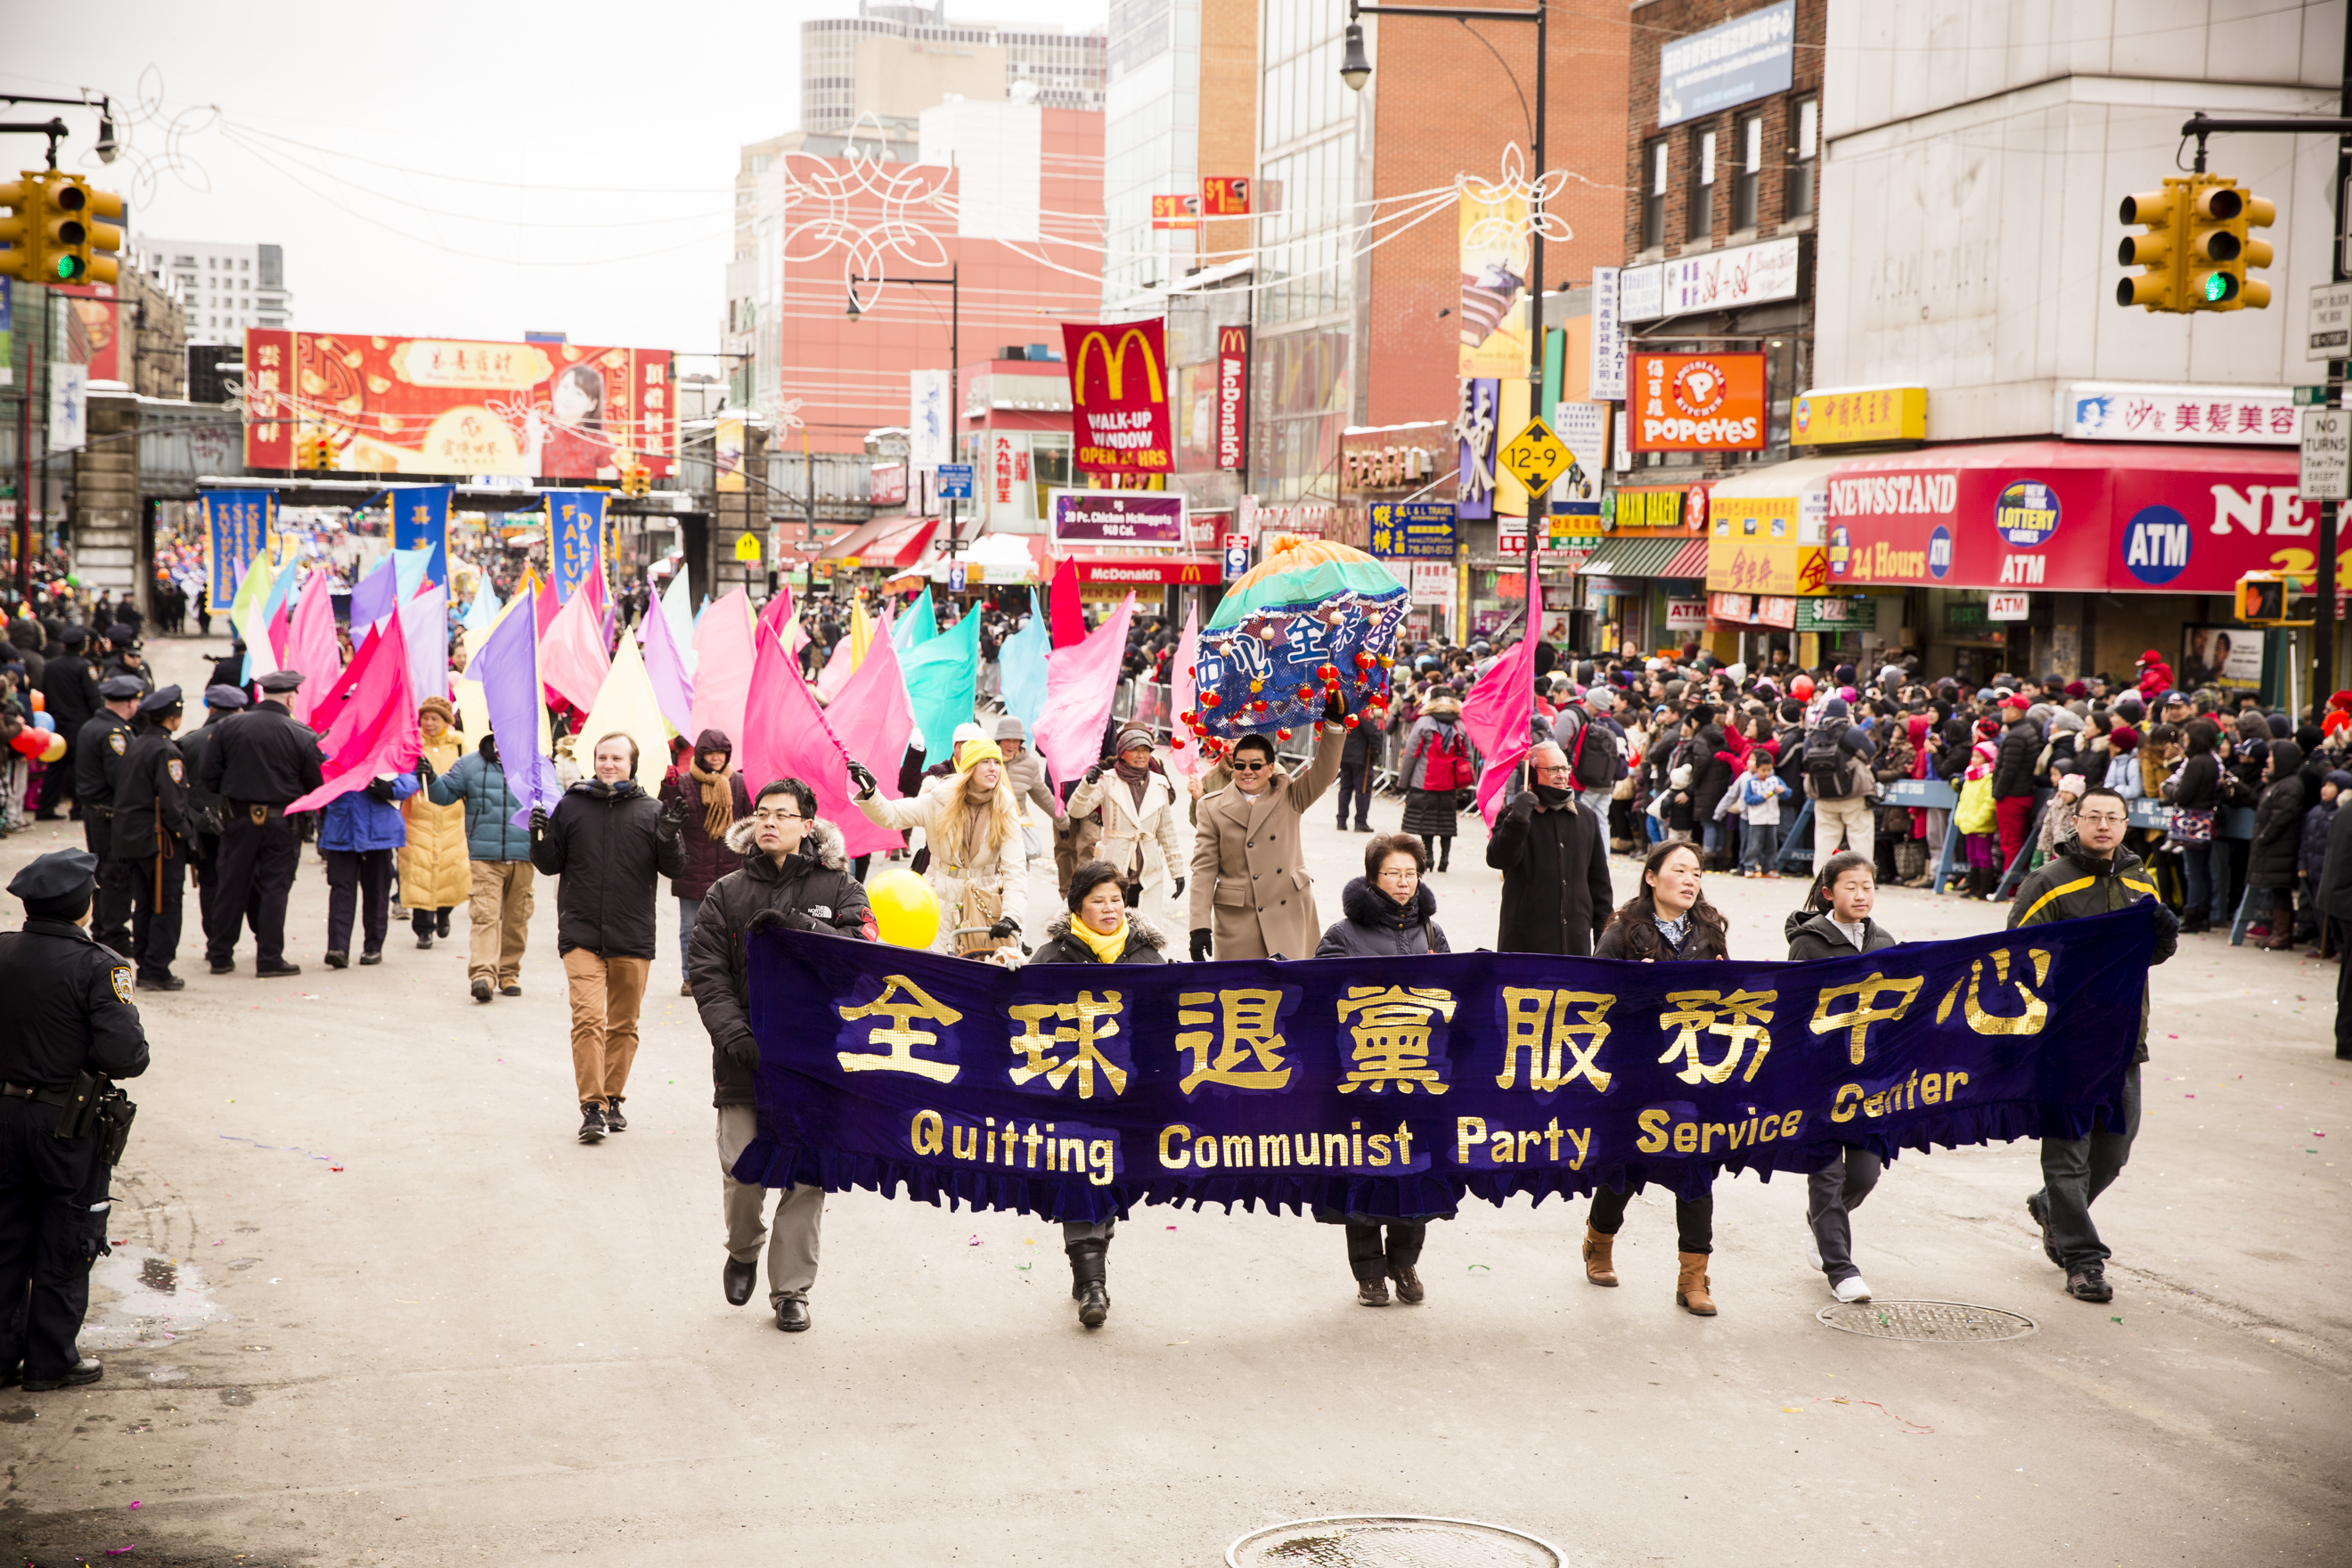 People marching for the Global Service Center for Quitting the CCP participate in the Chinese New Year parade in Flushing, New York, on Feb. 8, 2014. (Edward Dai/Epoch Times)